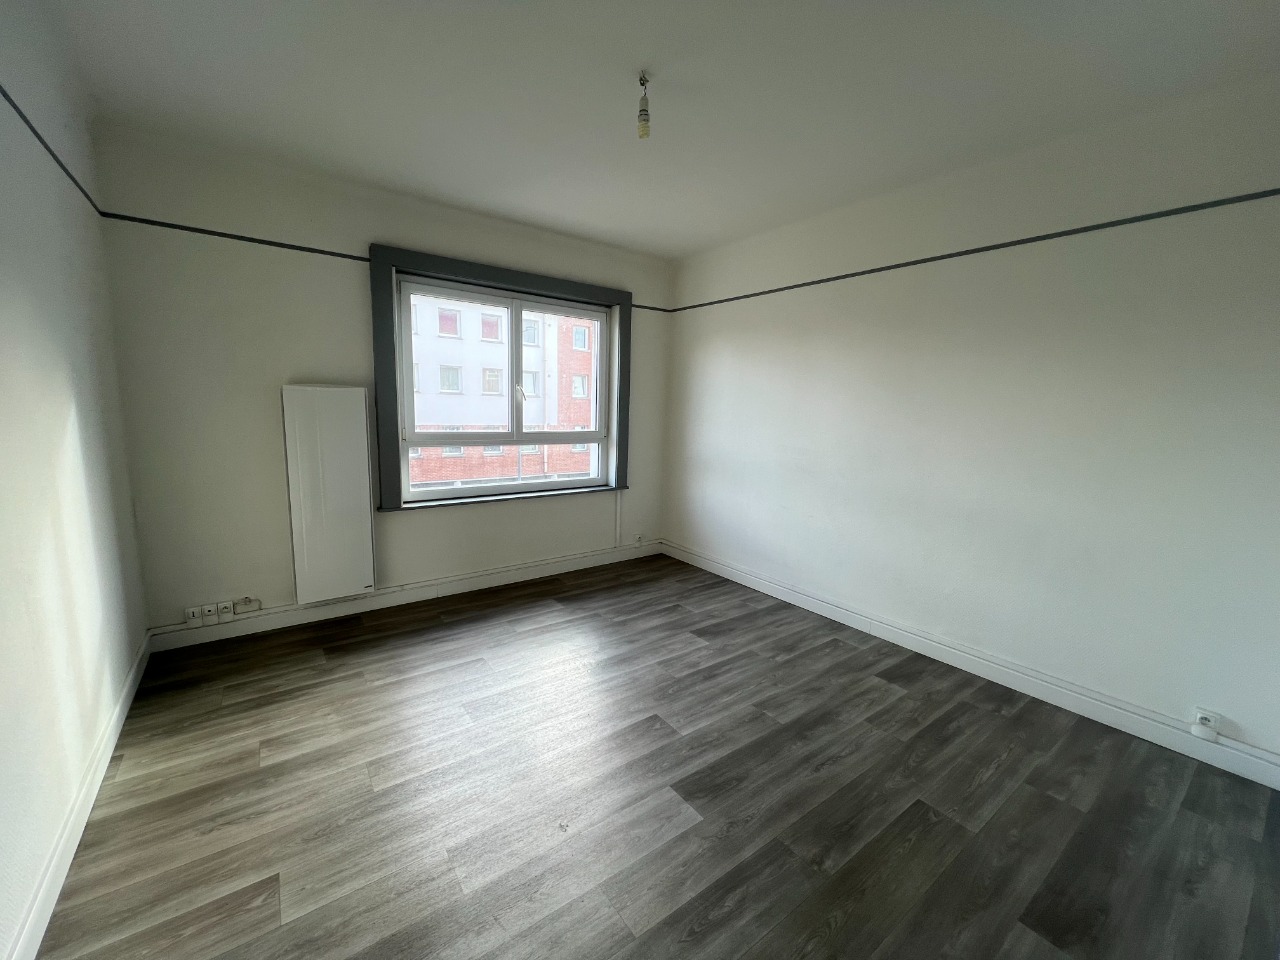 T3 lille Photo 3 - JLW Immobilier